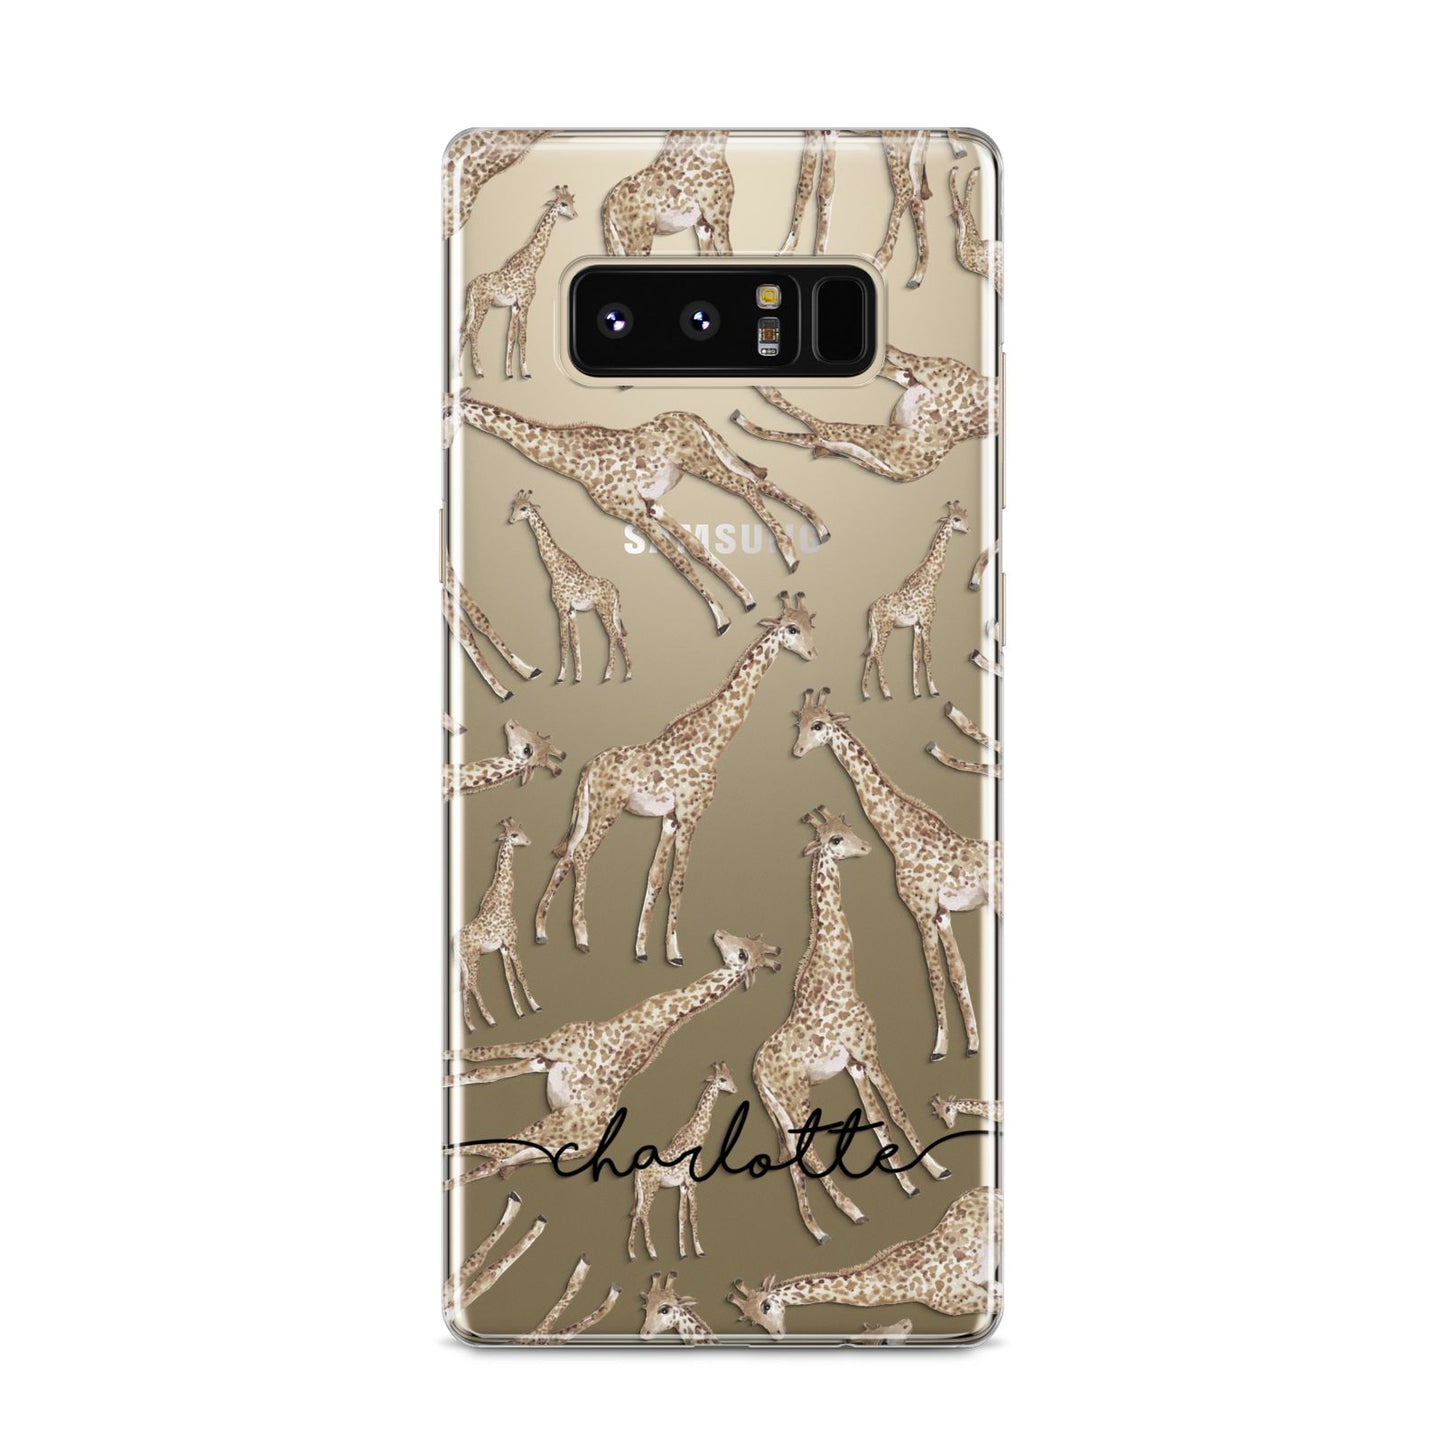 Personalised Giraffes with Name Samsung Galaxy S8 Case